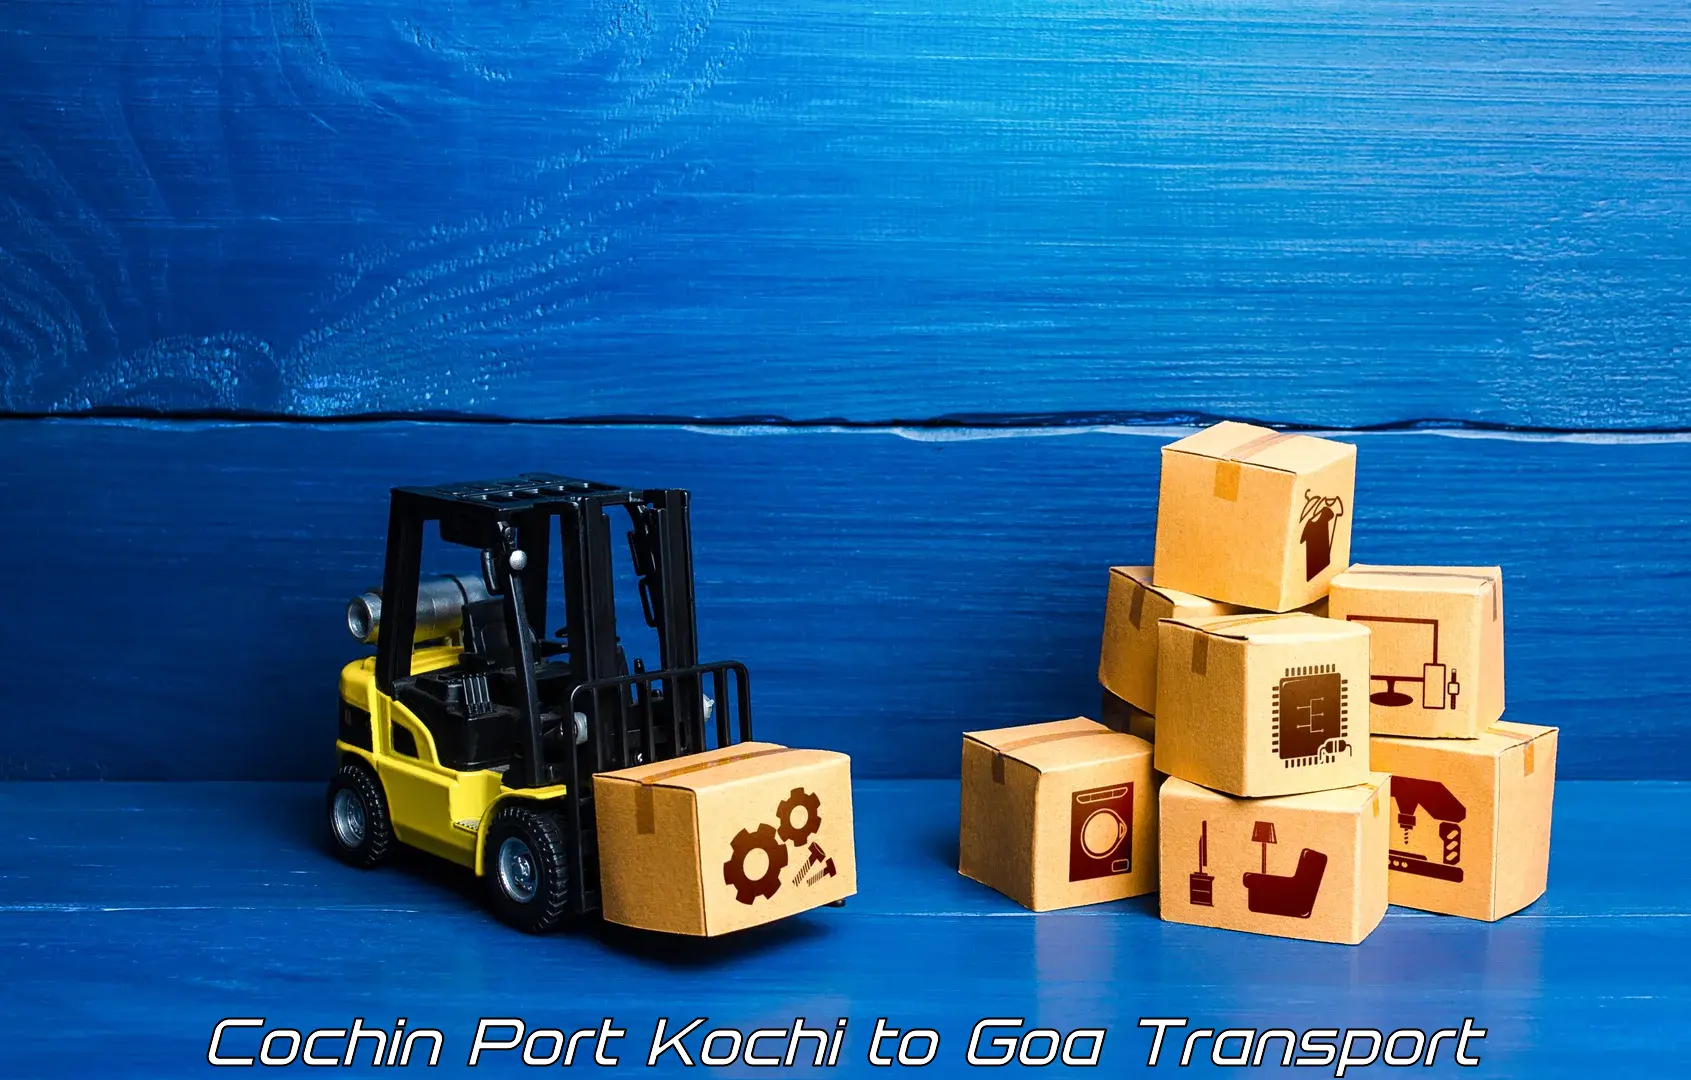 Transport bike from one state to another Cochin Port Kochi to Goa